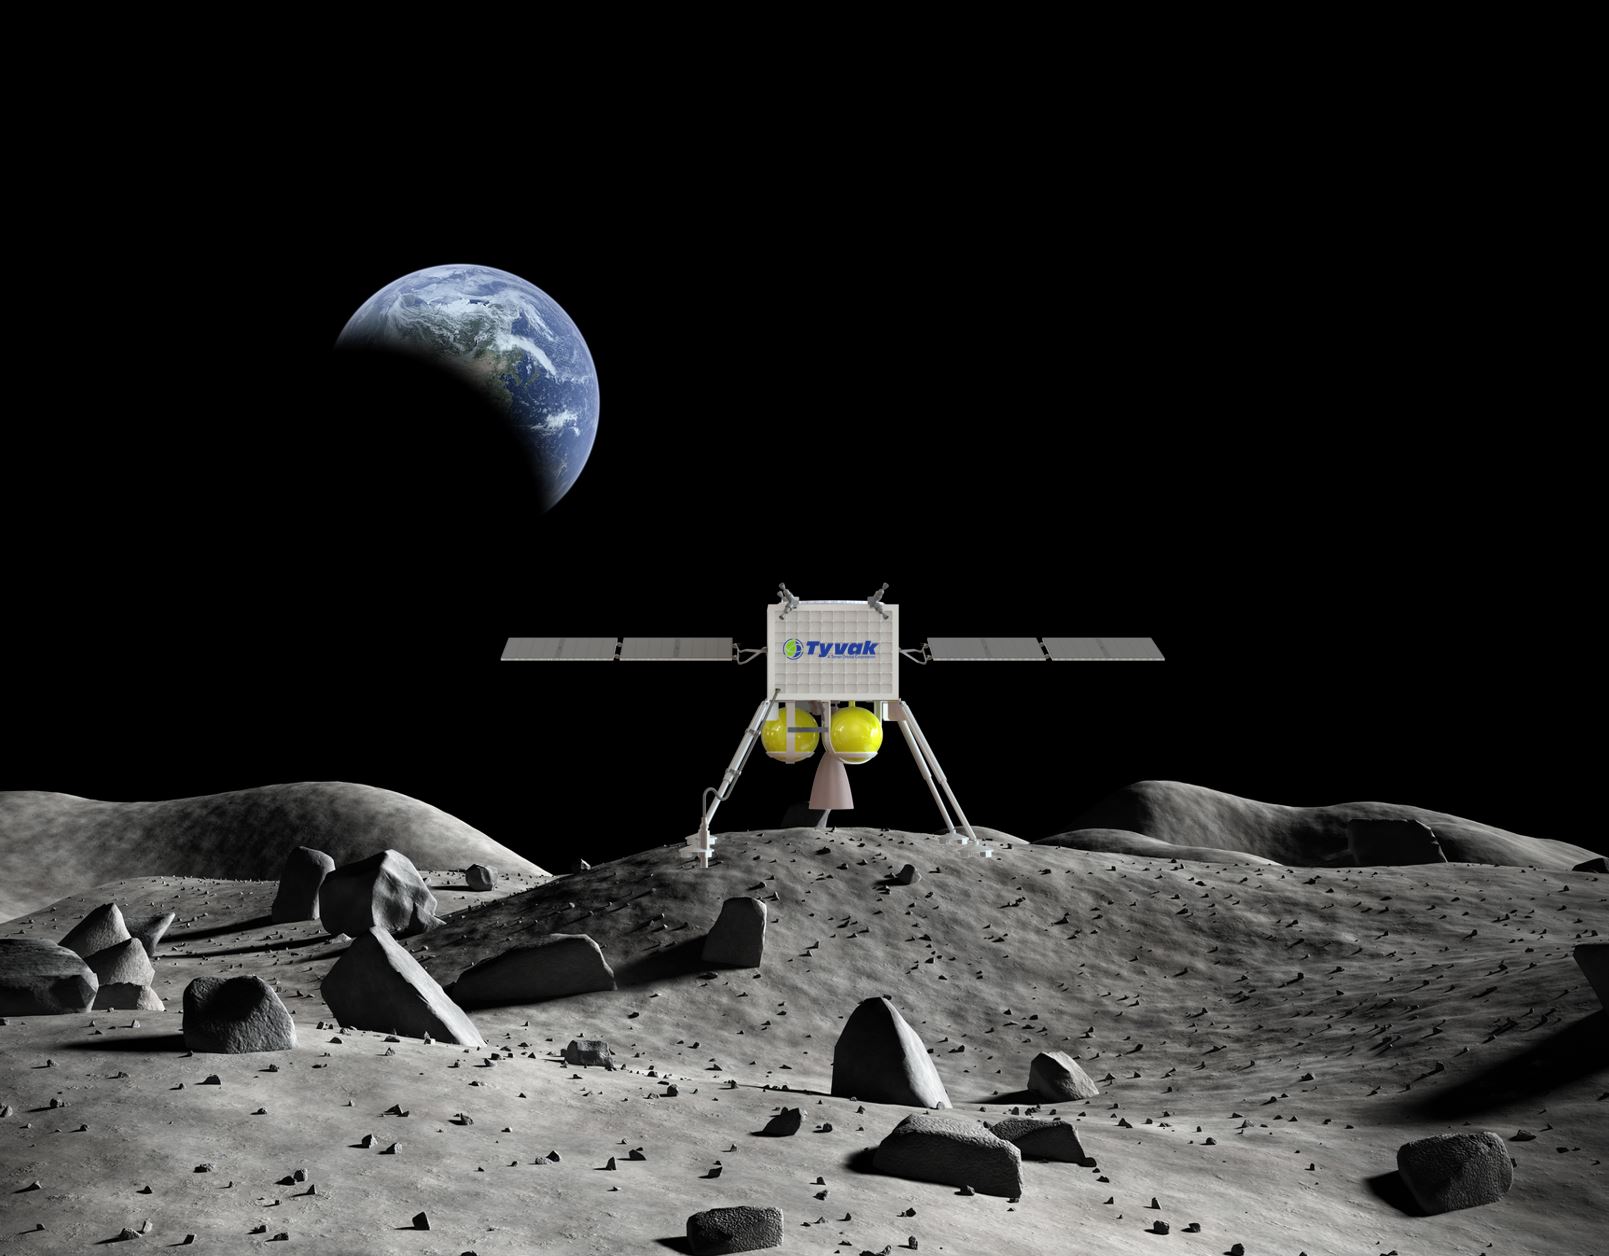 Artist's concept of a Tyvak commercial lander on the Moon.